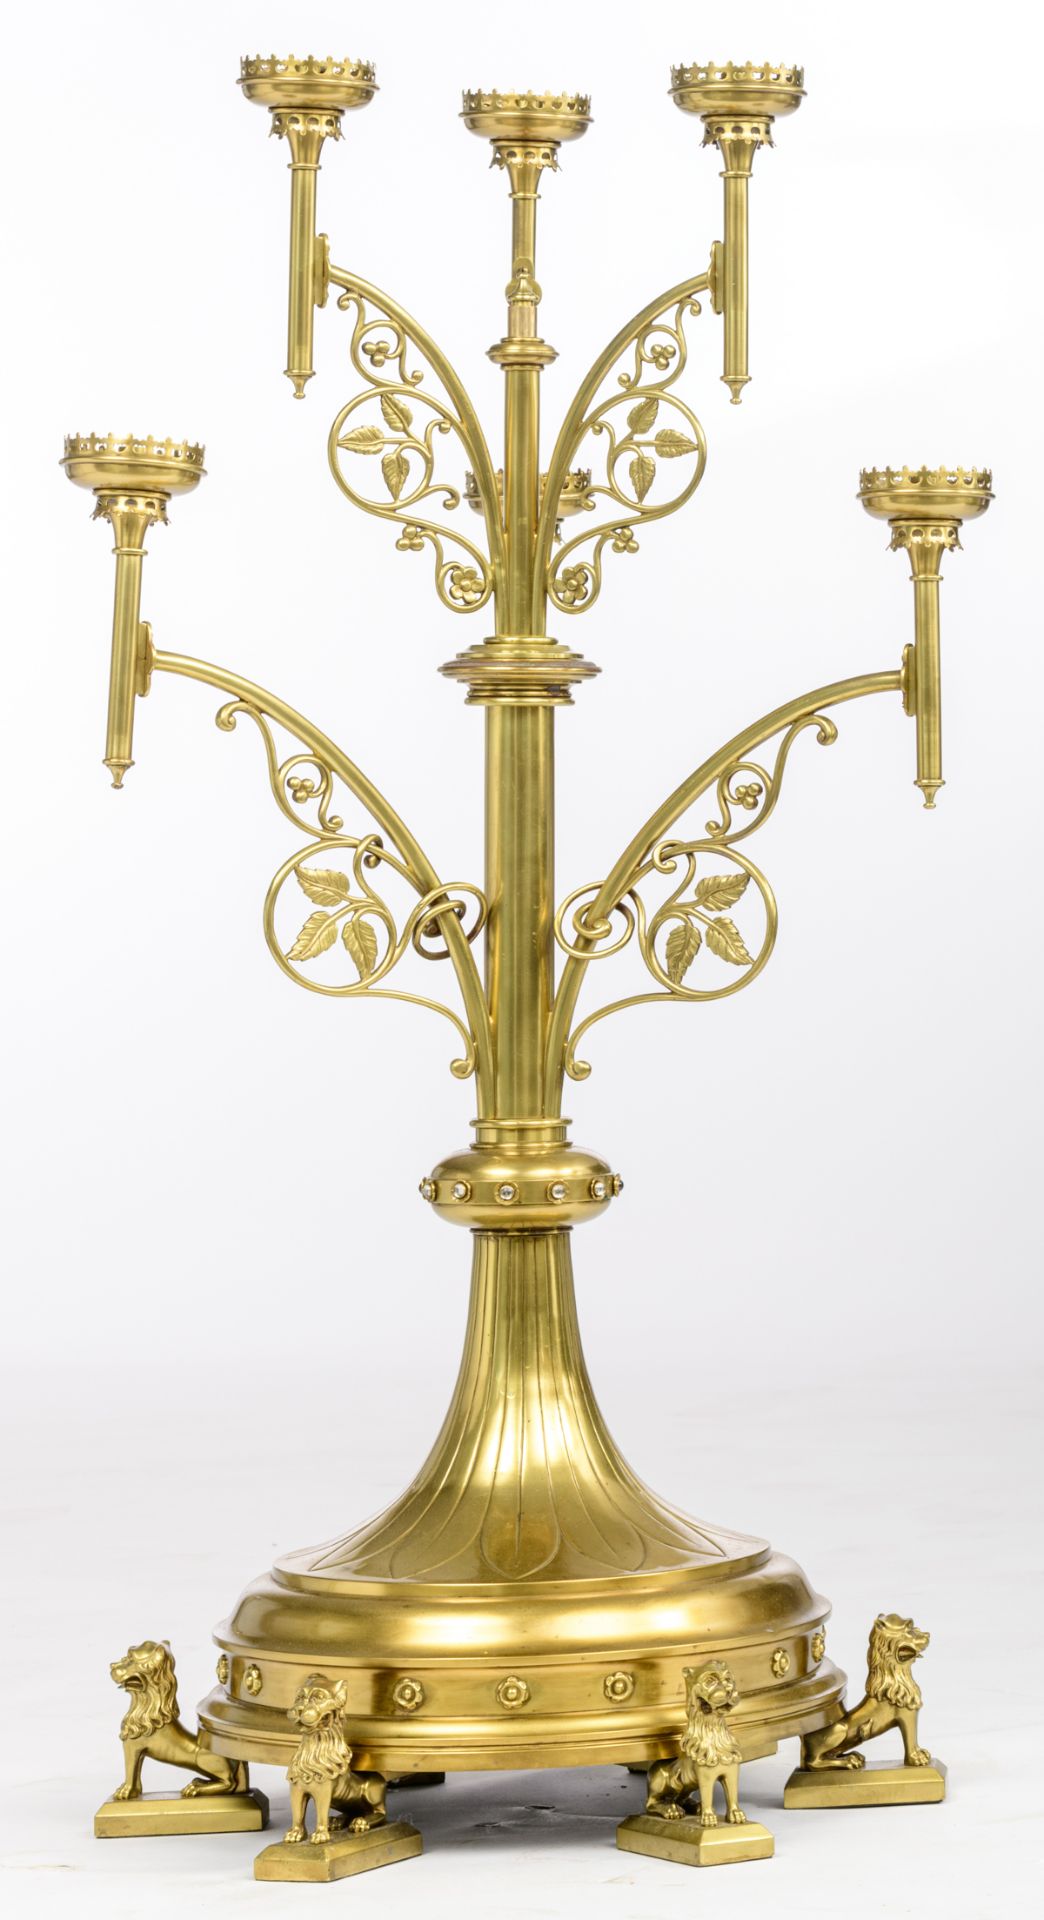 An imposing bronze Gothic Revival floor candelabra on lion-shaped feet, the six arms decorated with - Bild 3 aus 6